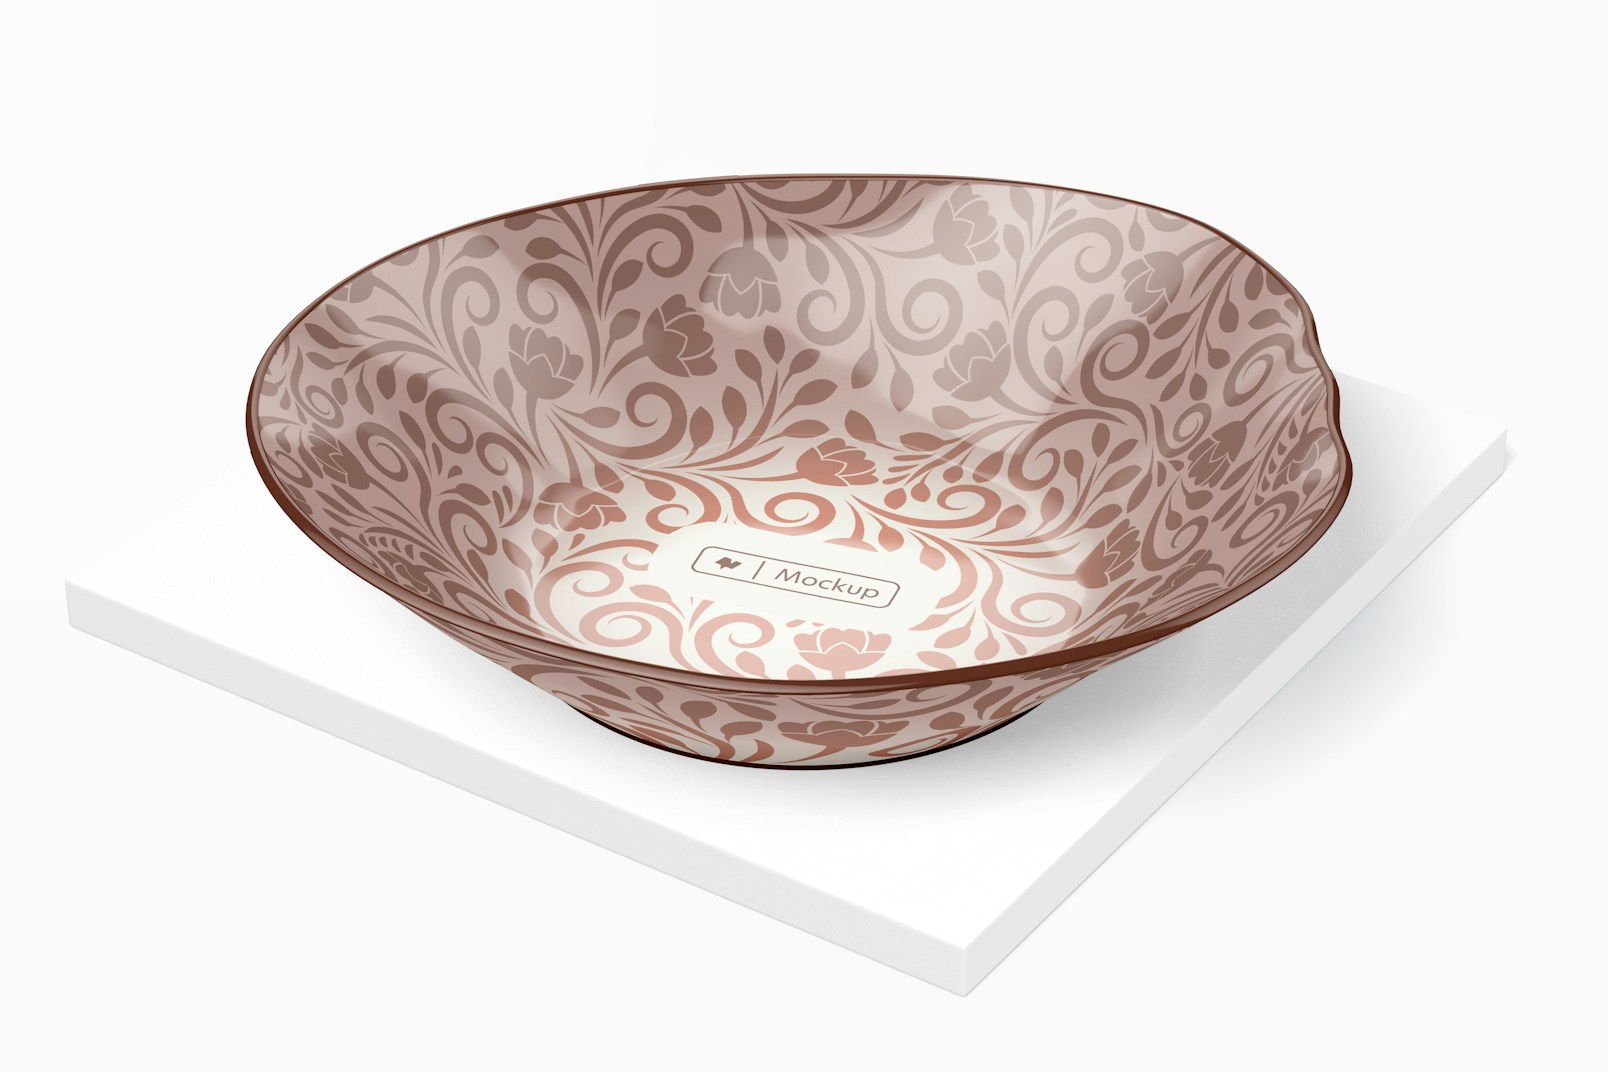 Irregular Shaped Plate Mockup, Perspective View